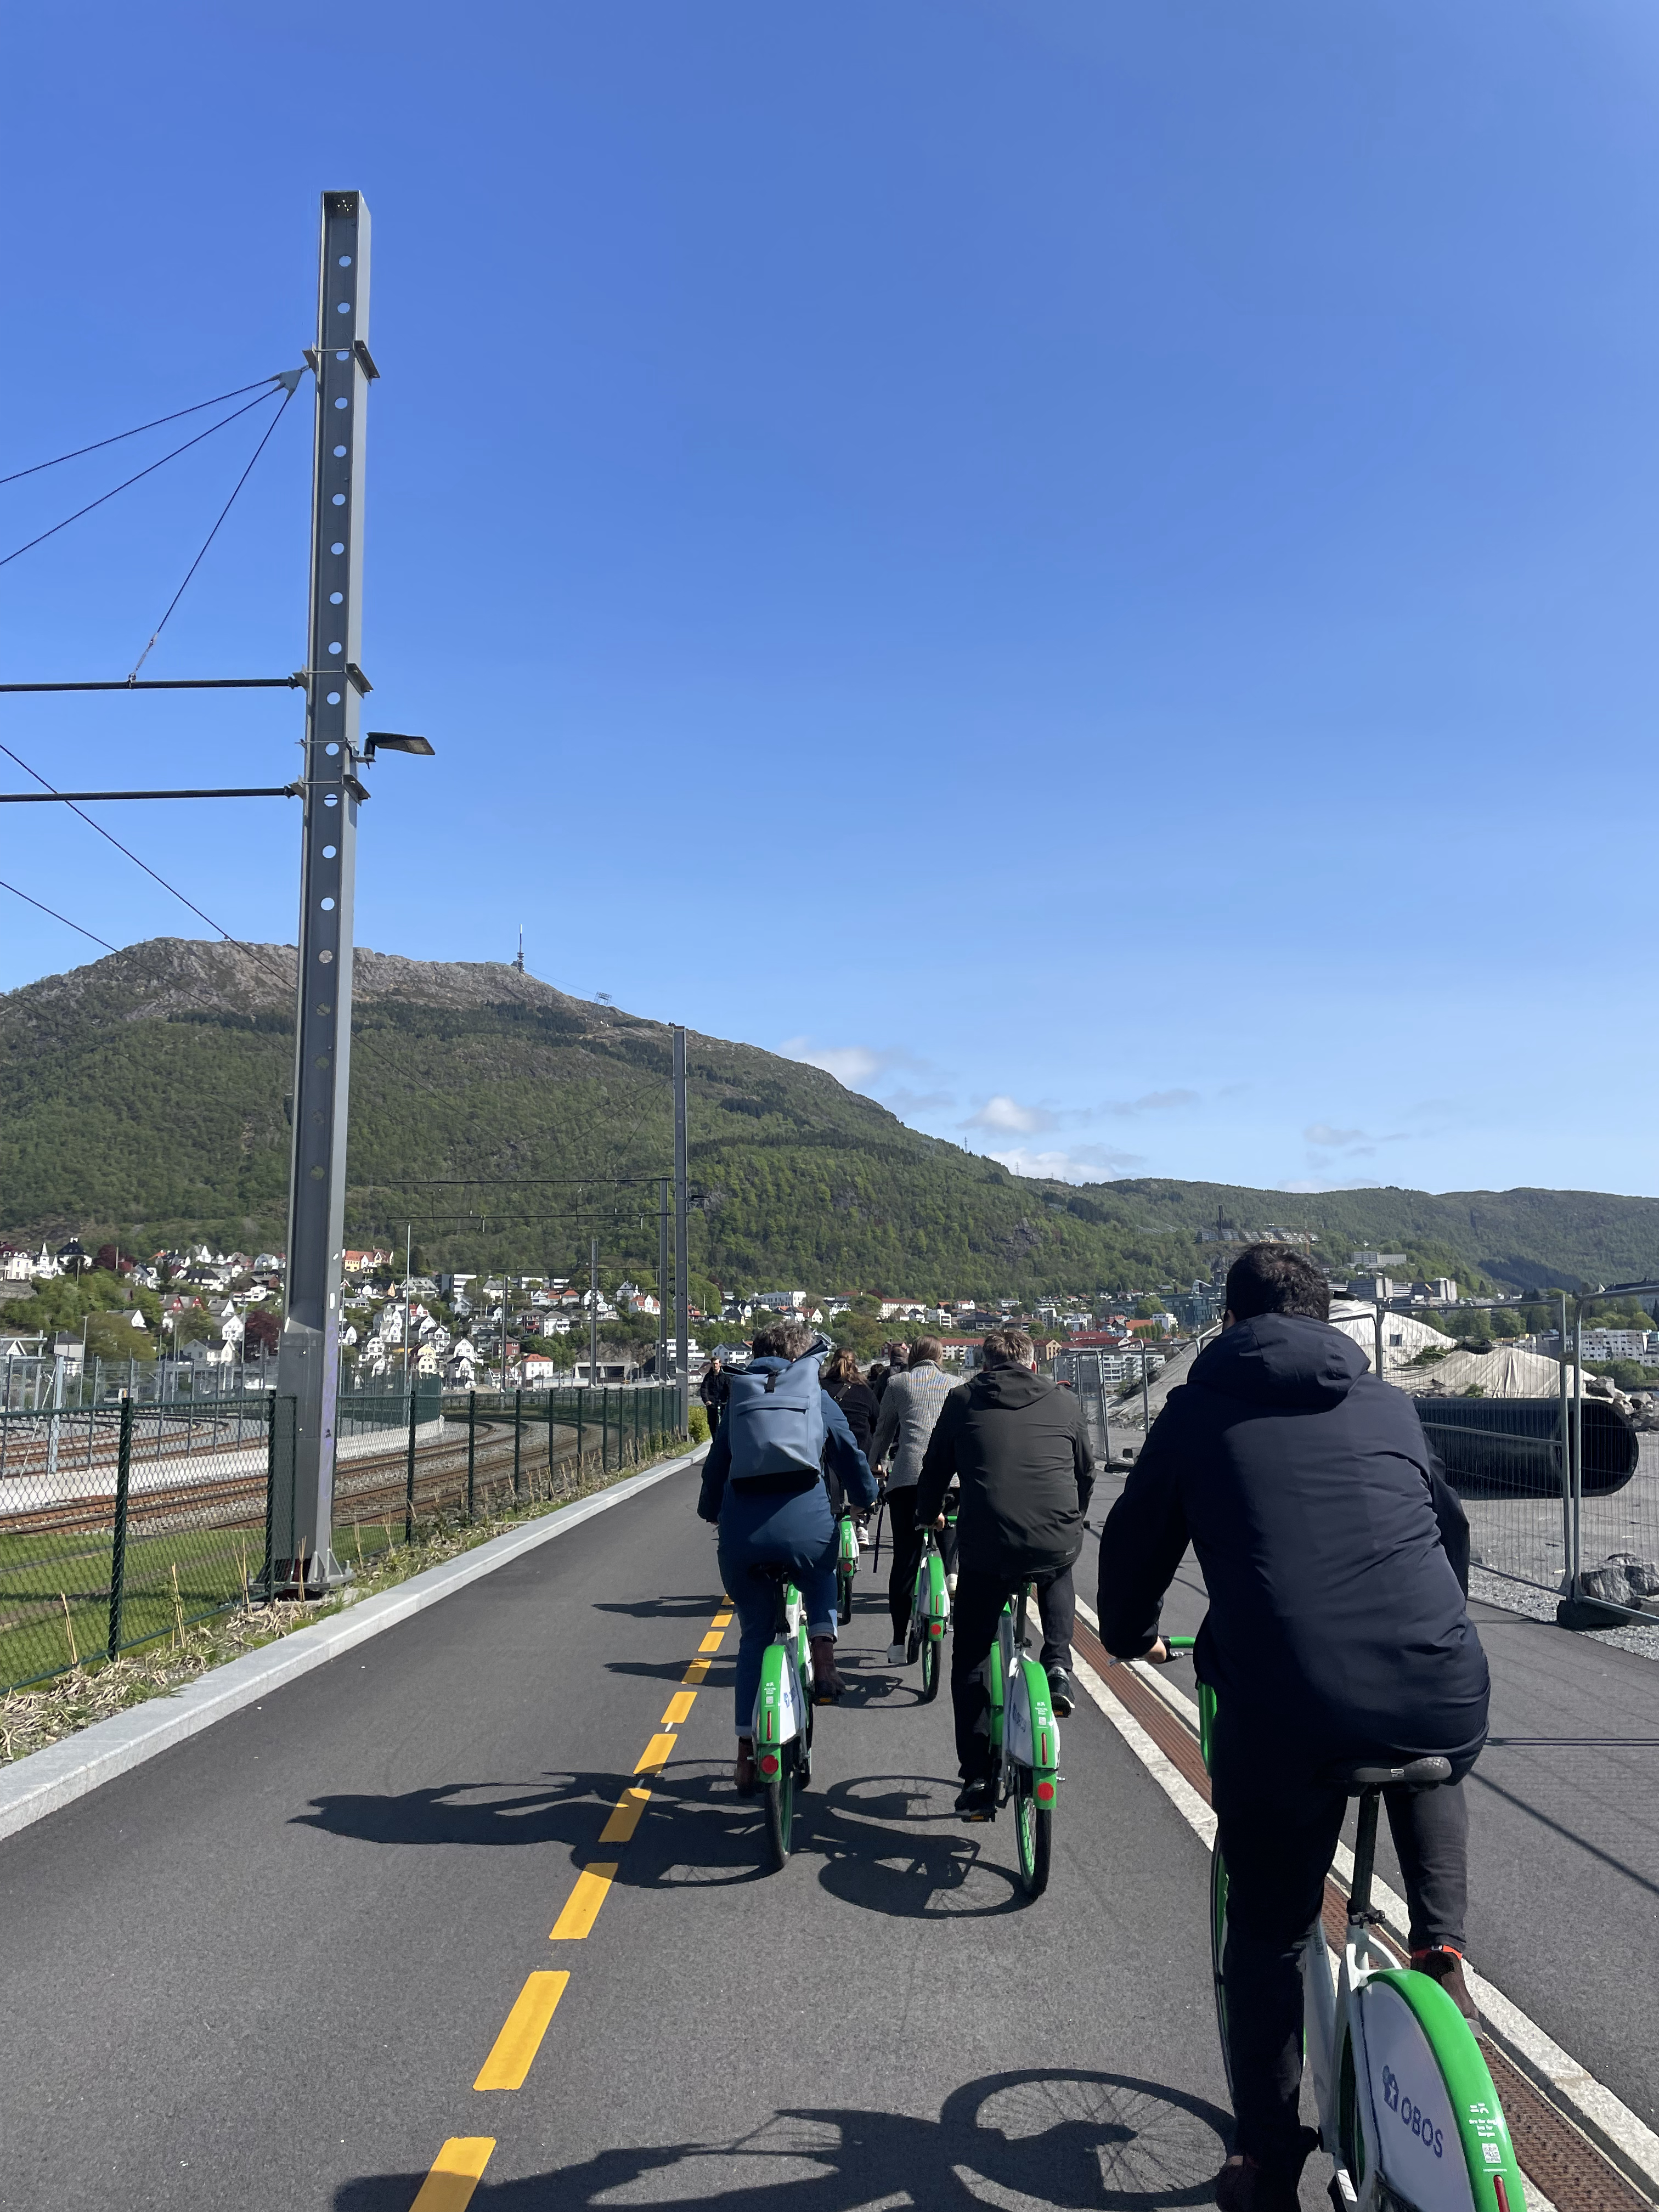 Attendees had the opportunity to test out Bergen's new Active Mobility infrastructure